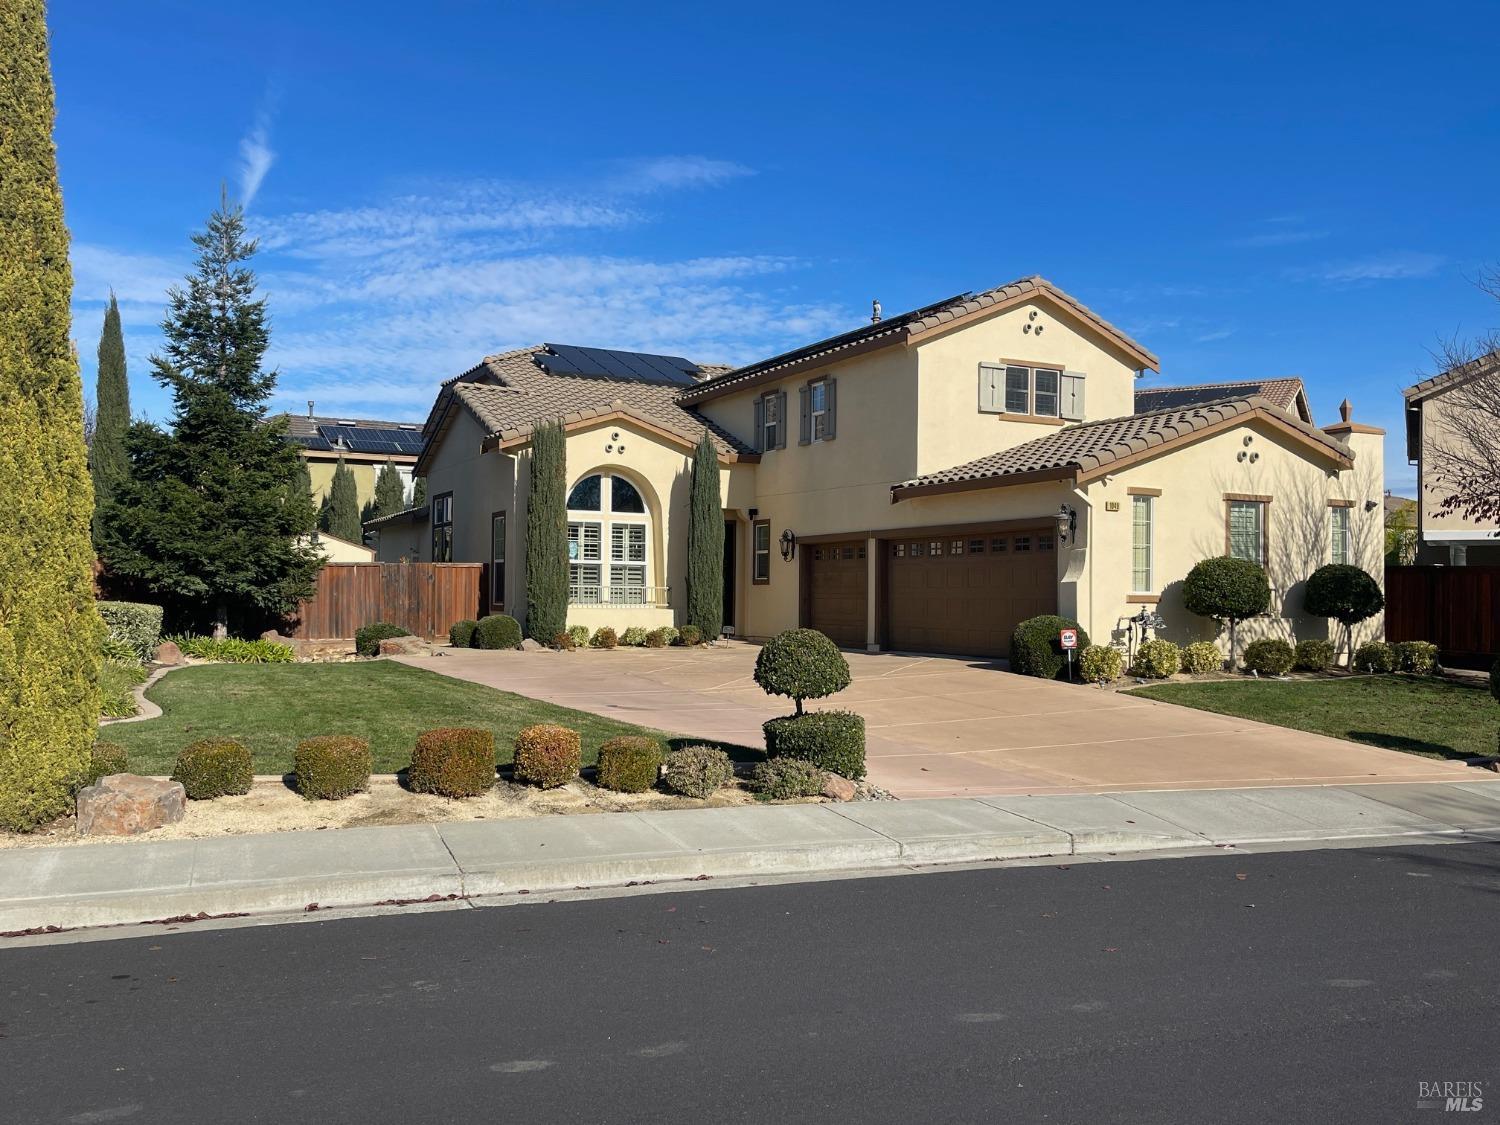 Photo of 1049 N Station Dr in Vacaville, CA